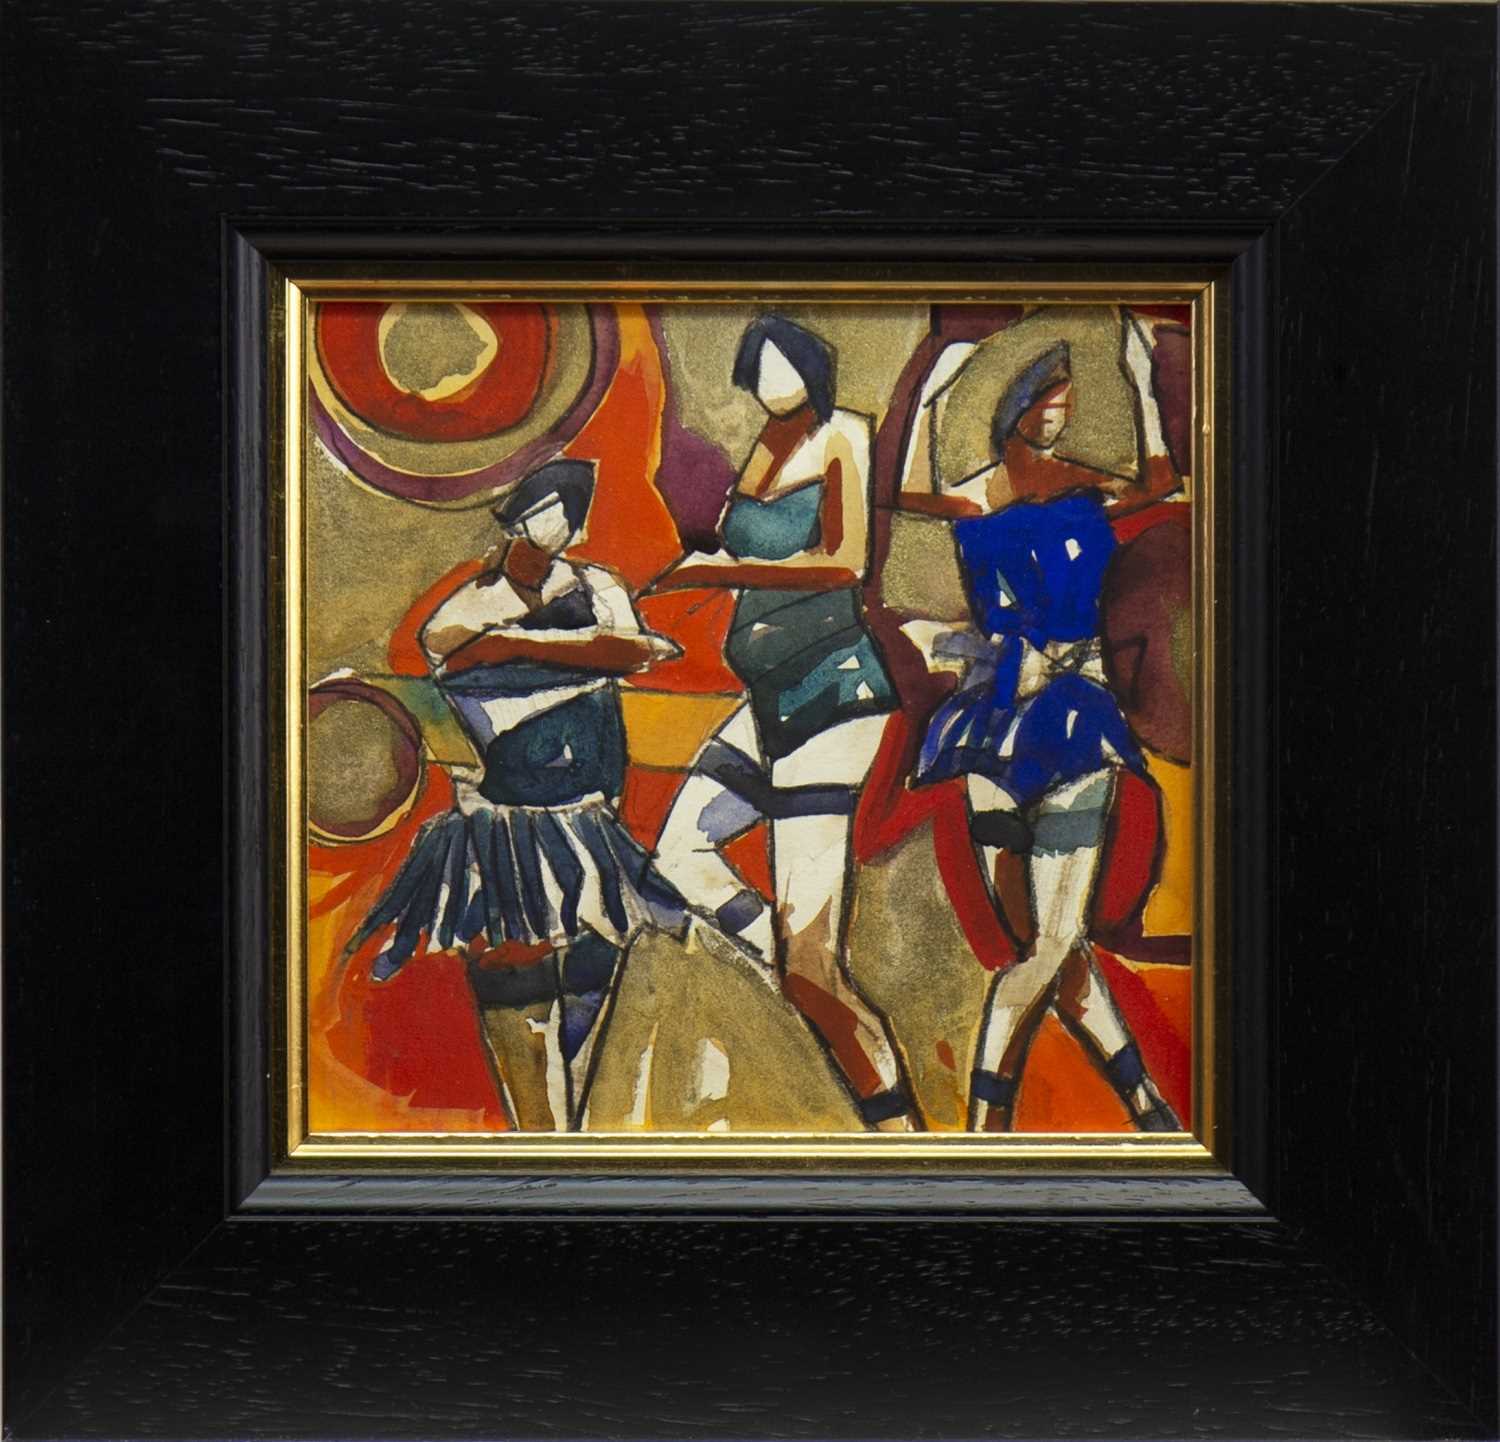 Lot 555 - THE DANCERS, A MIXED MEDIA BY JAMIE O'DEA